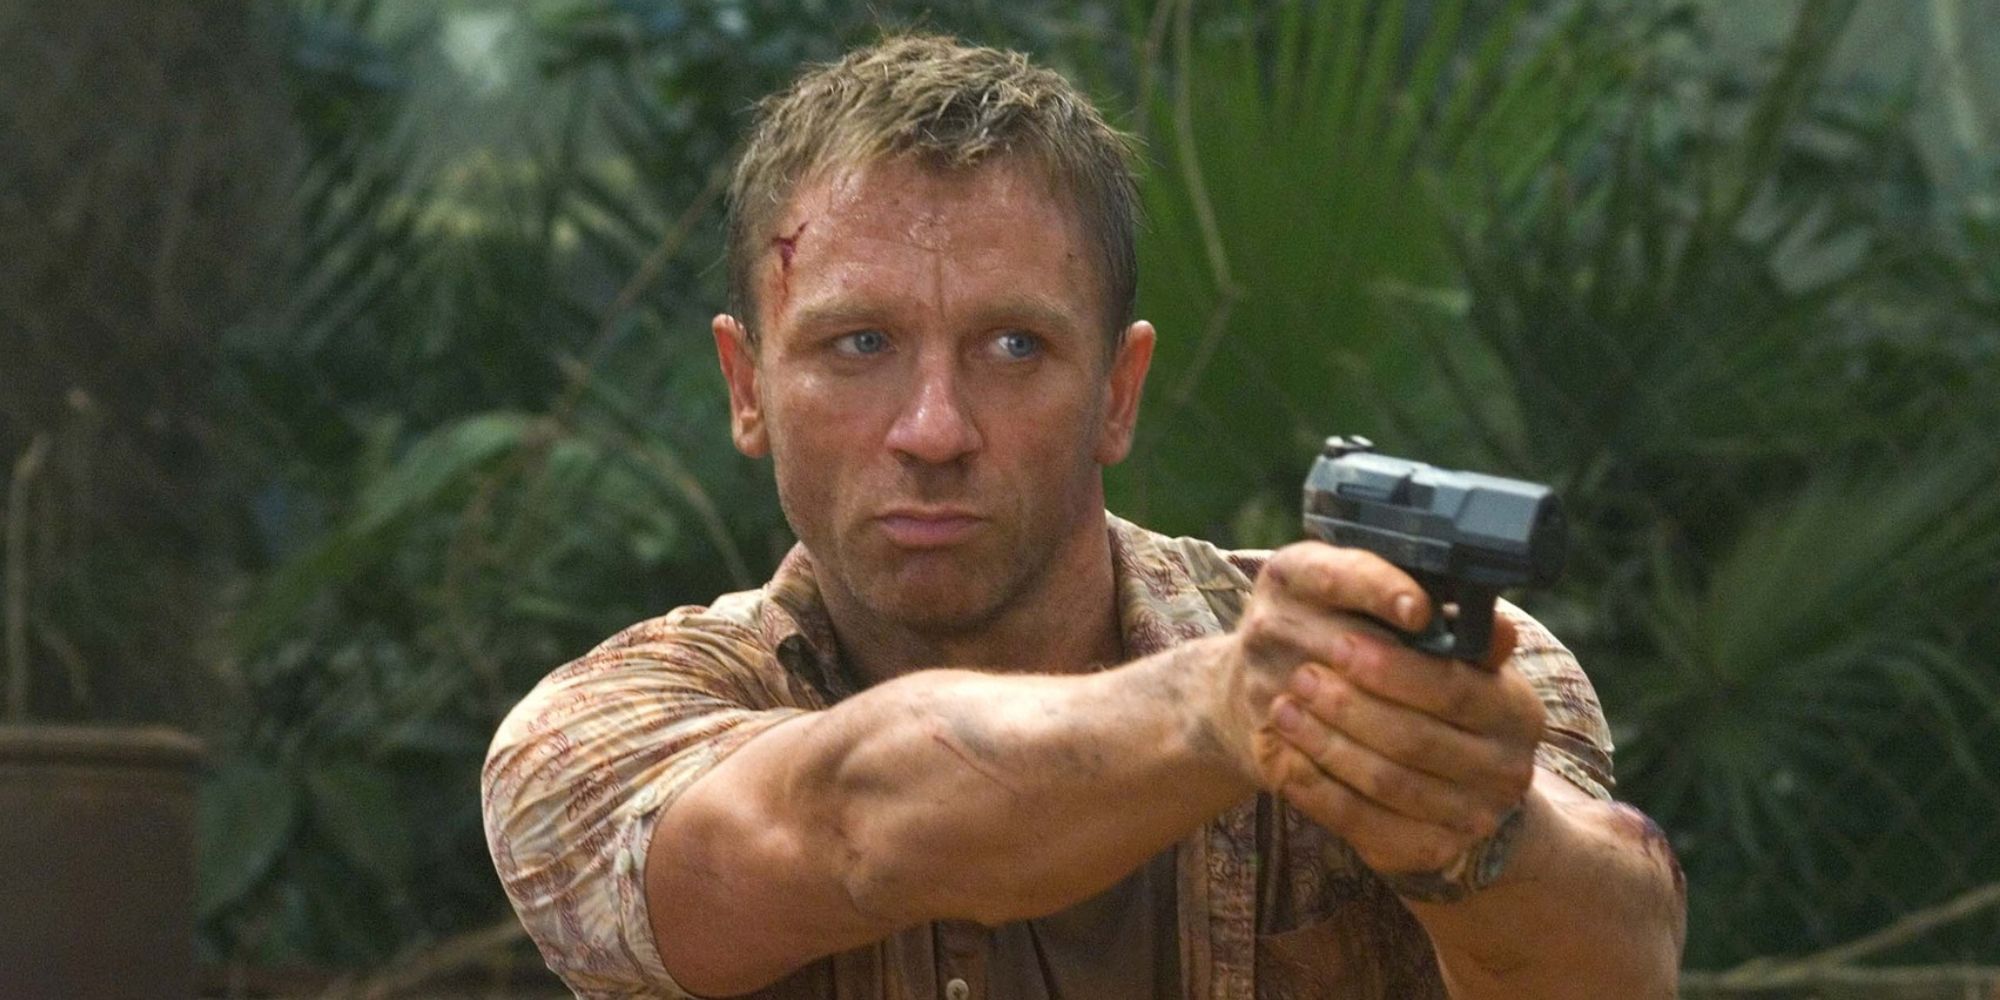 Daniel Craig as James Bond looking beaten up and holding a gun in Casino Royale